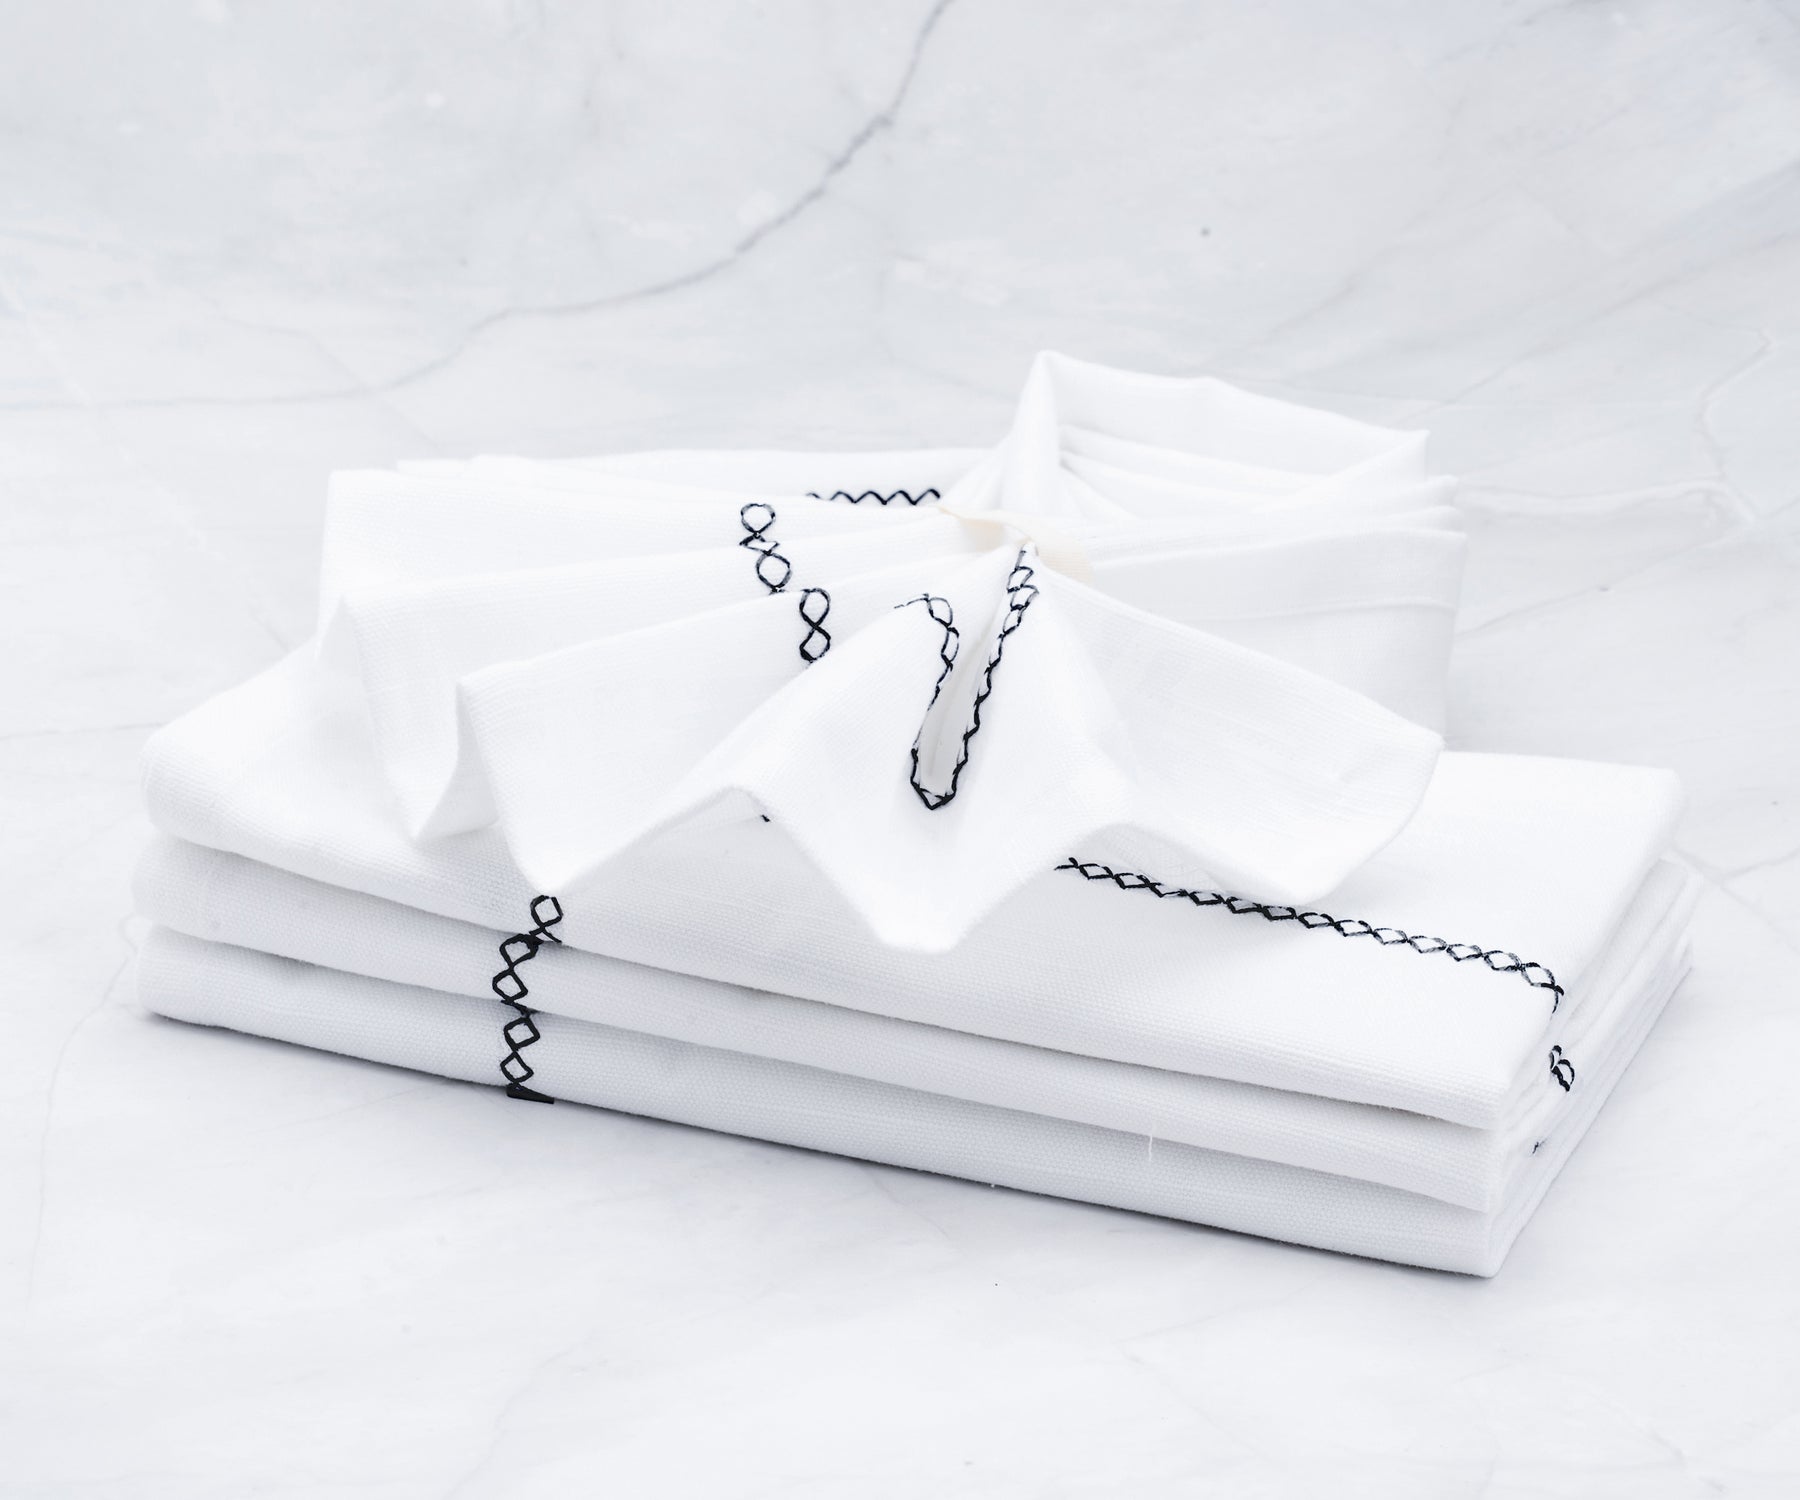 embroidery black napkins or white cotton napkins are made with woven fabric.